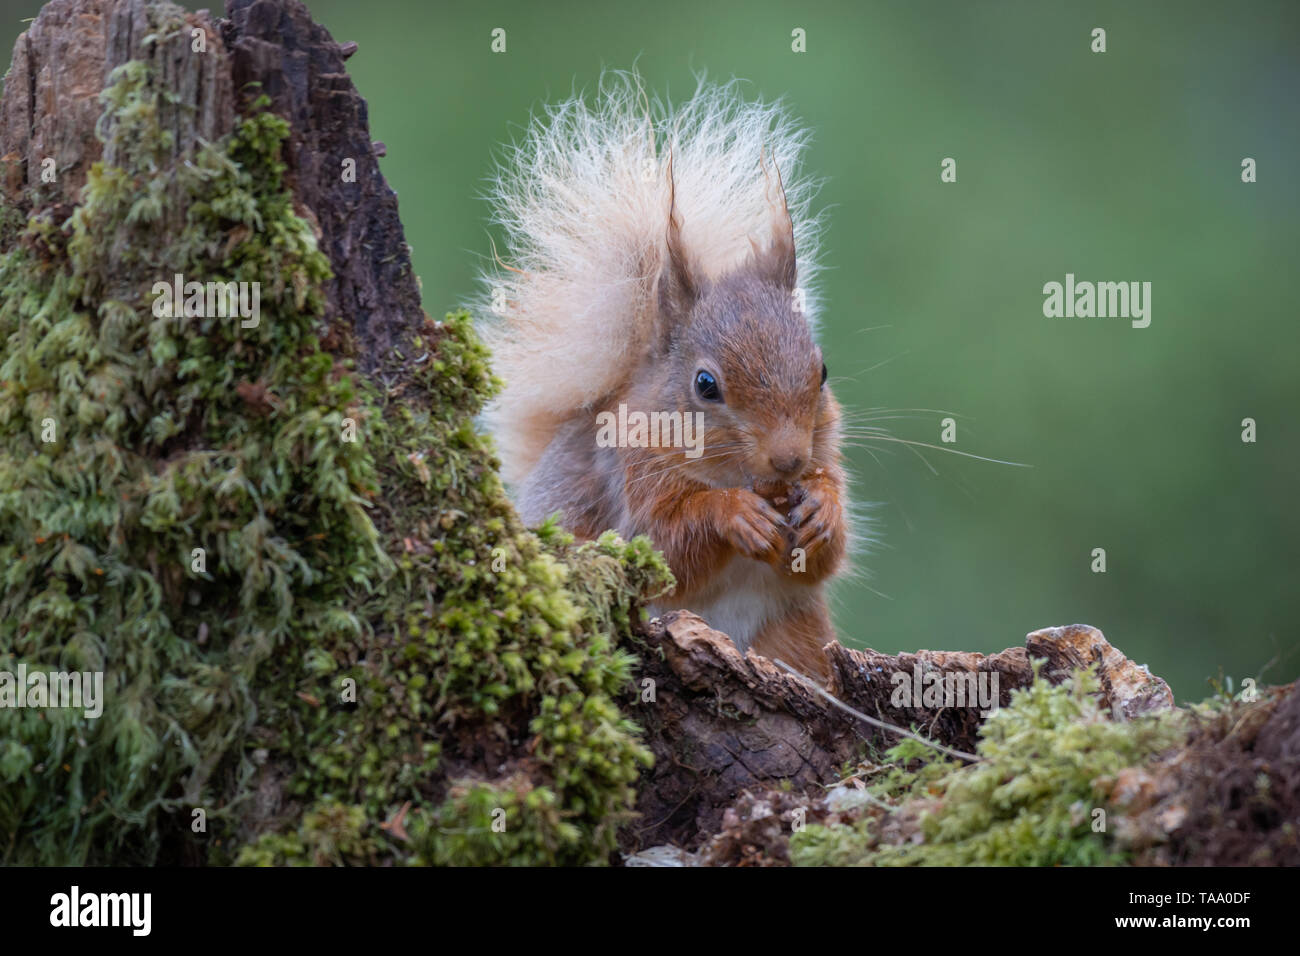 A front portrait image of a red squirrel with a bushy tail sitting on an old lichen covered tree stump eating a hazelnut Stock Photo